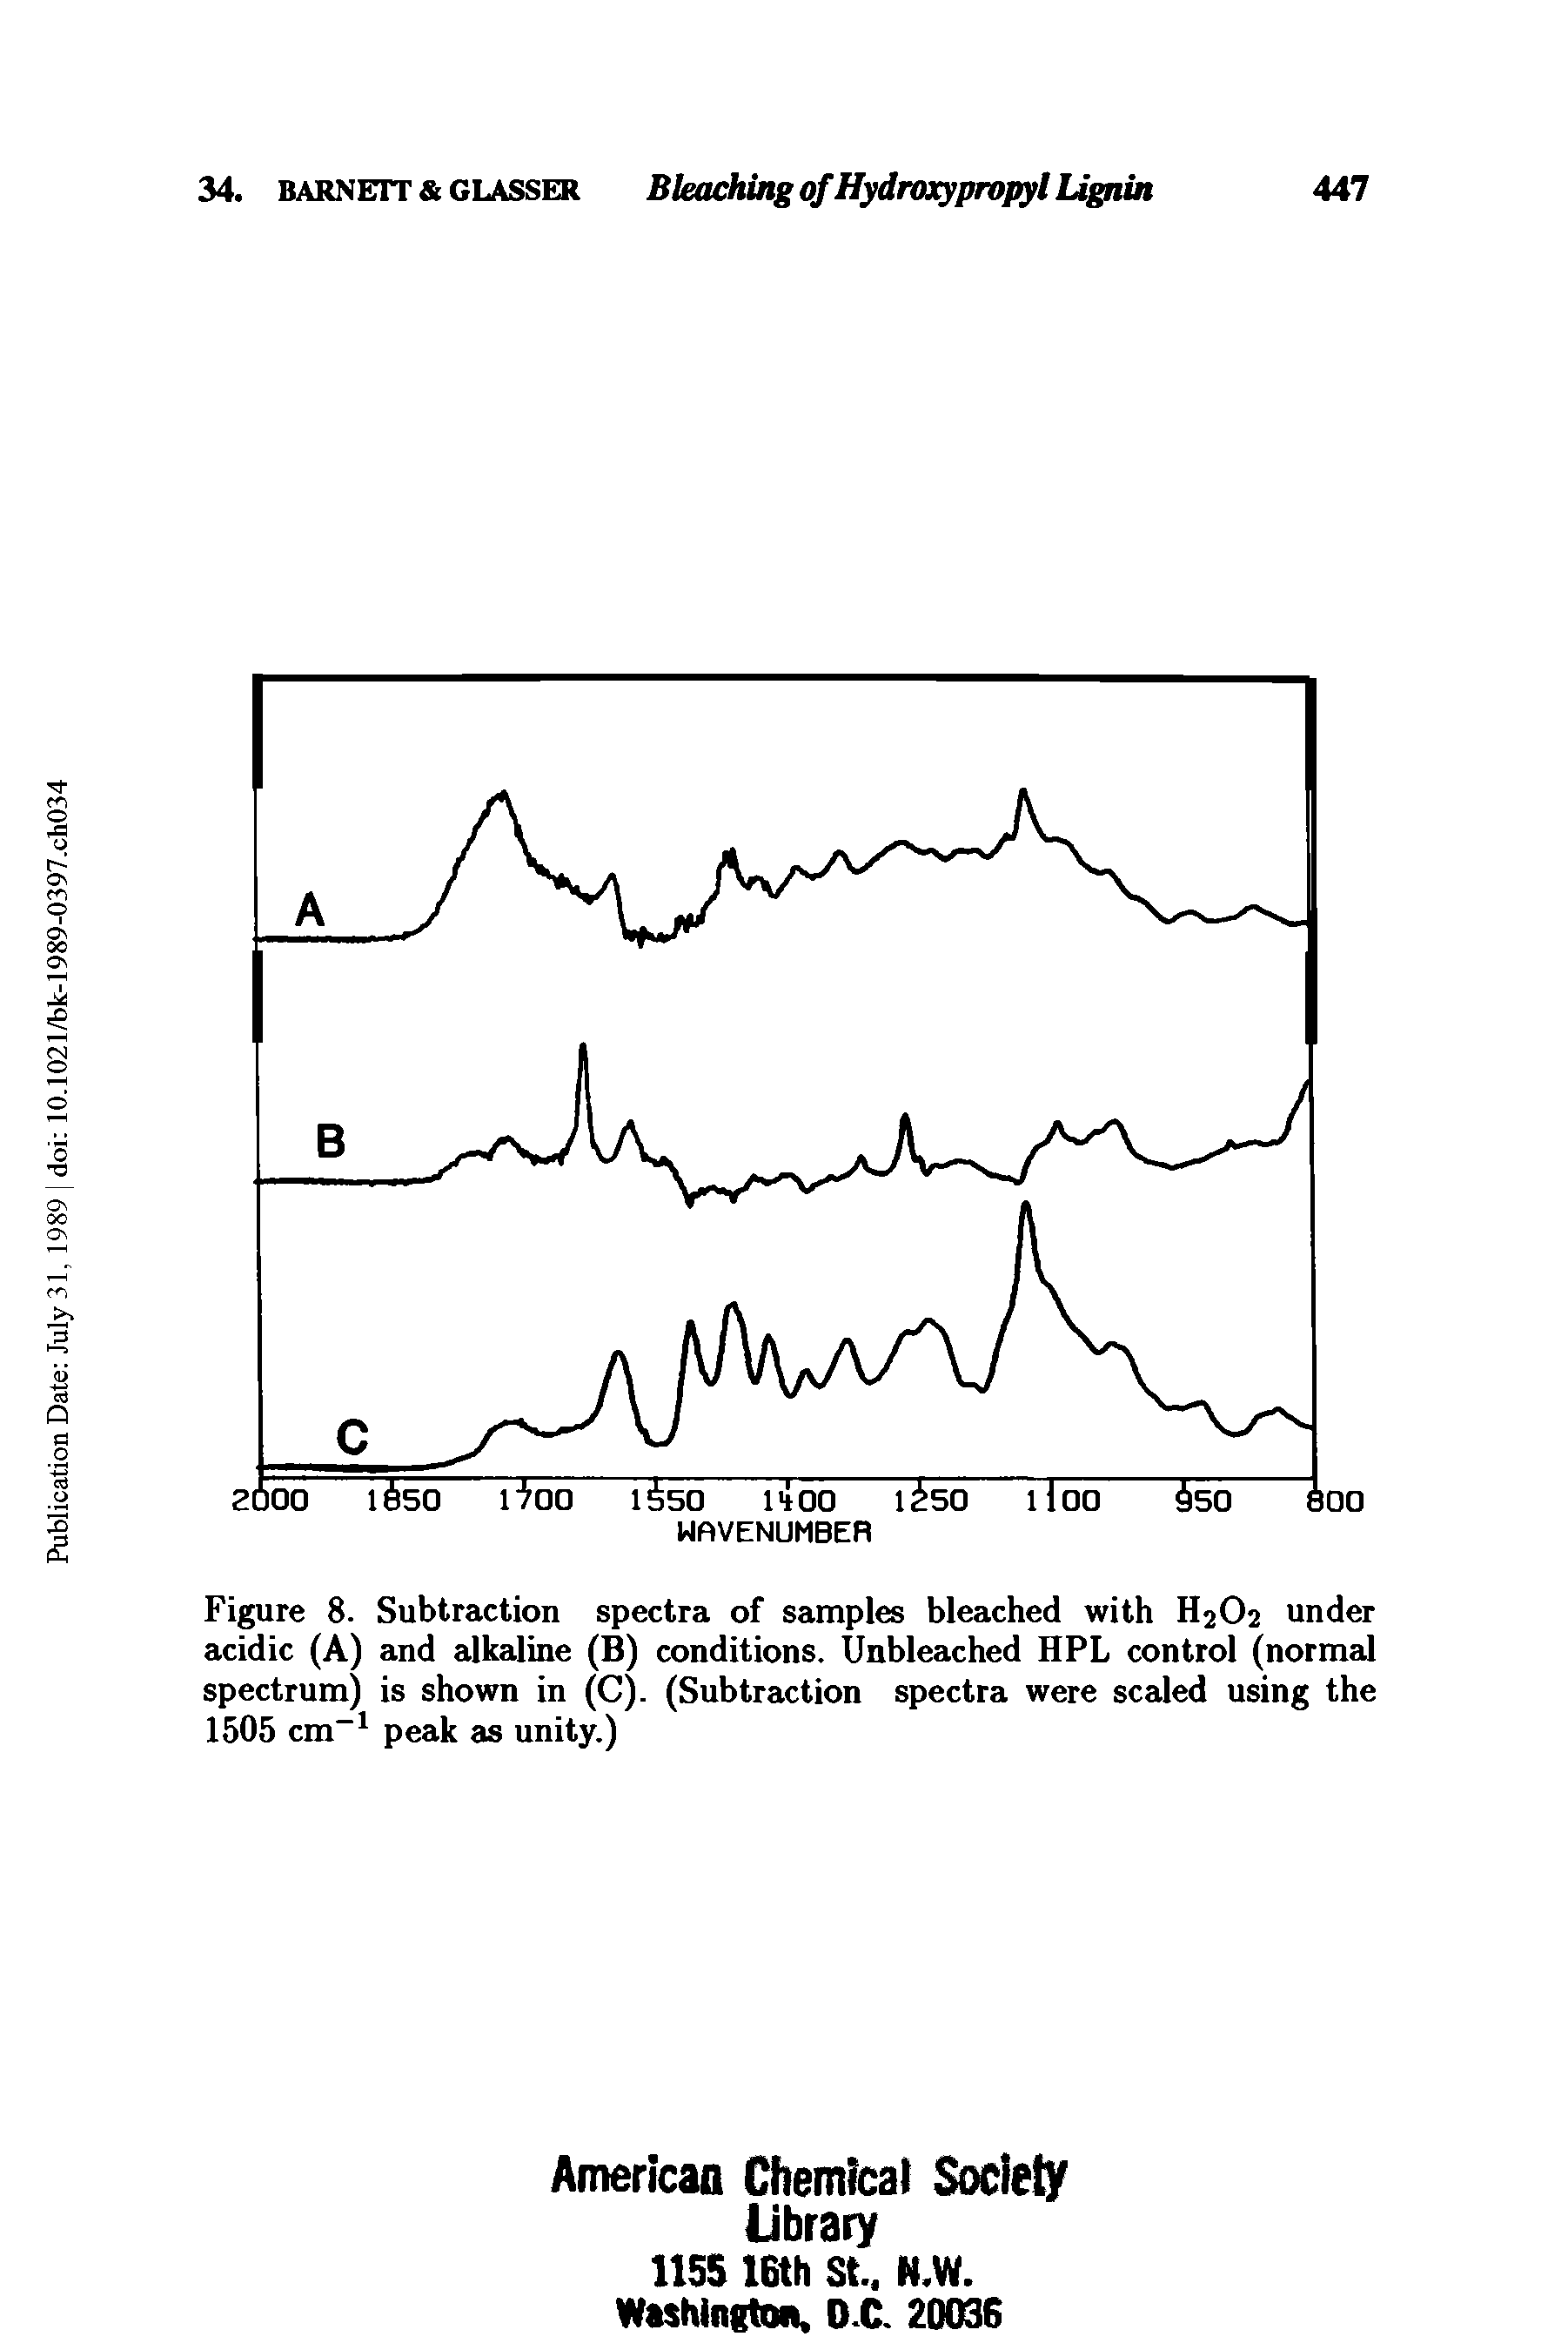 Figure 8. Subtraction spectra of samples bleached with H2O2 under acidic (A) and alkaline (B) conditions. Unbleached HPL control (normal spectrum) is shown in (C). (Subtraction spectra were scaled using the 1505 cm-1 peak as unity.)...